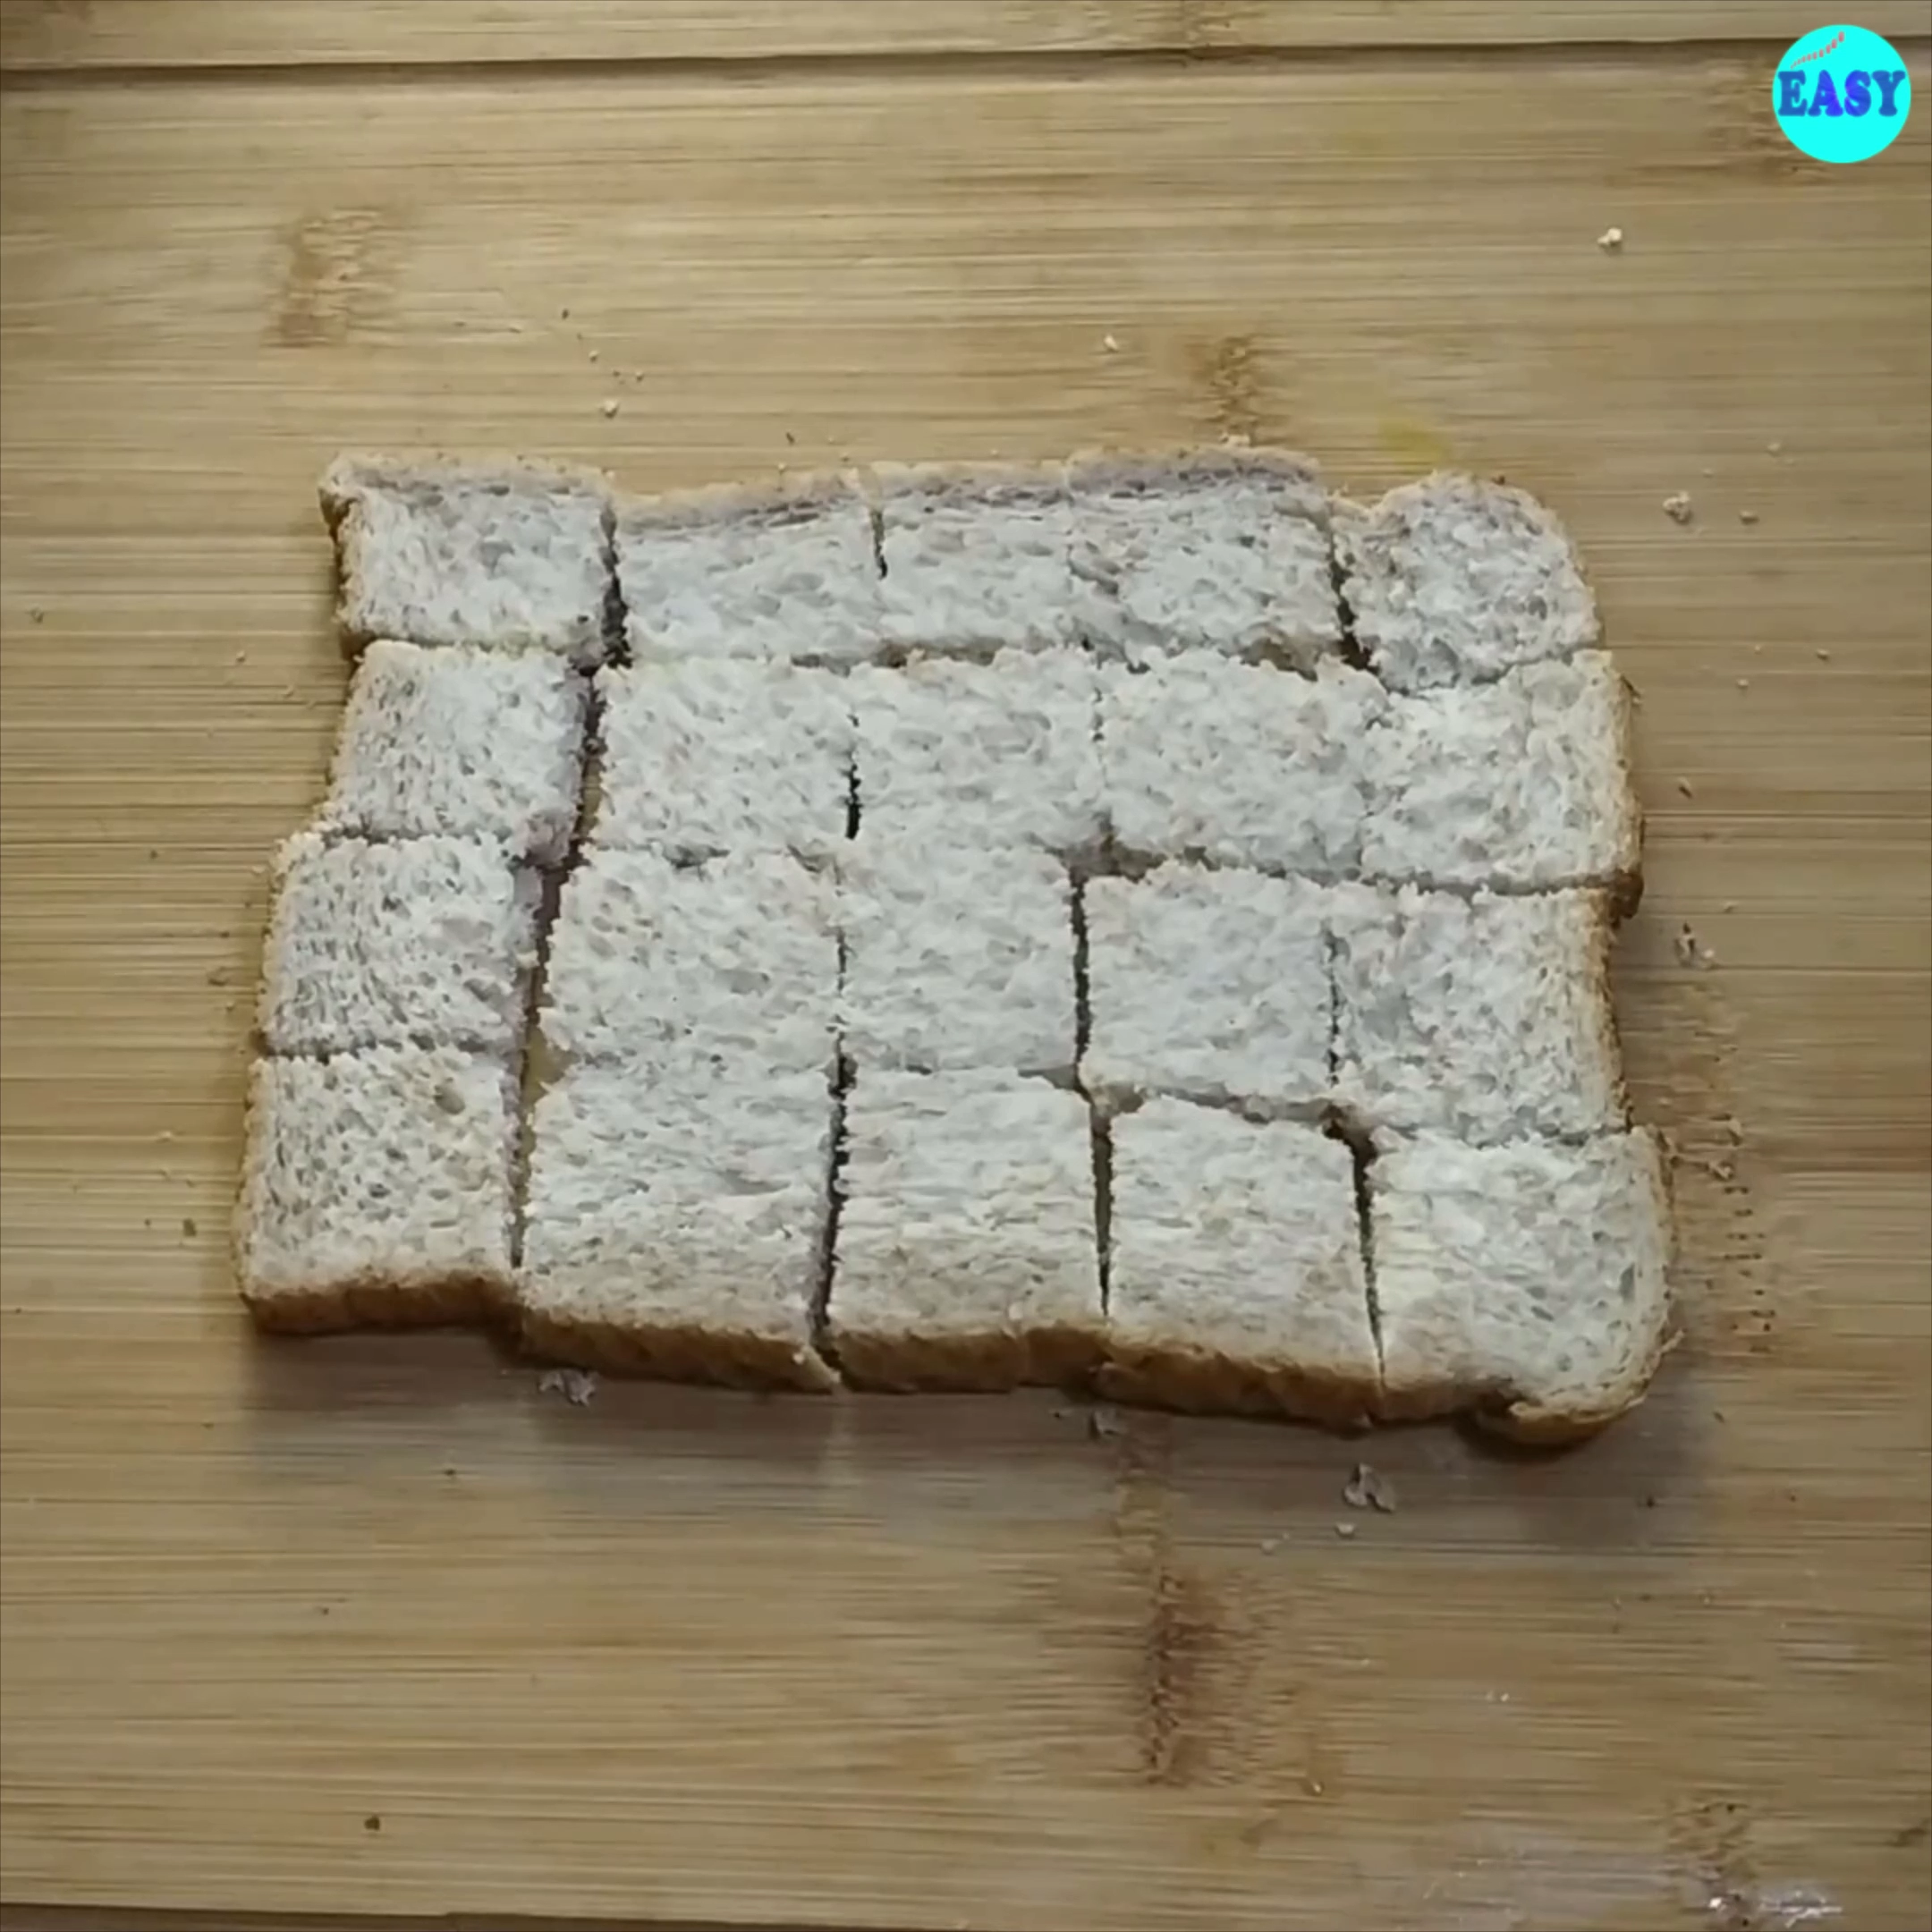 Step 11 - To make croutons at home-Dice the bread slices into small pieces. 